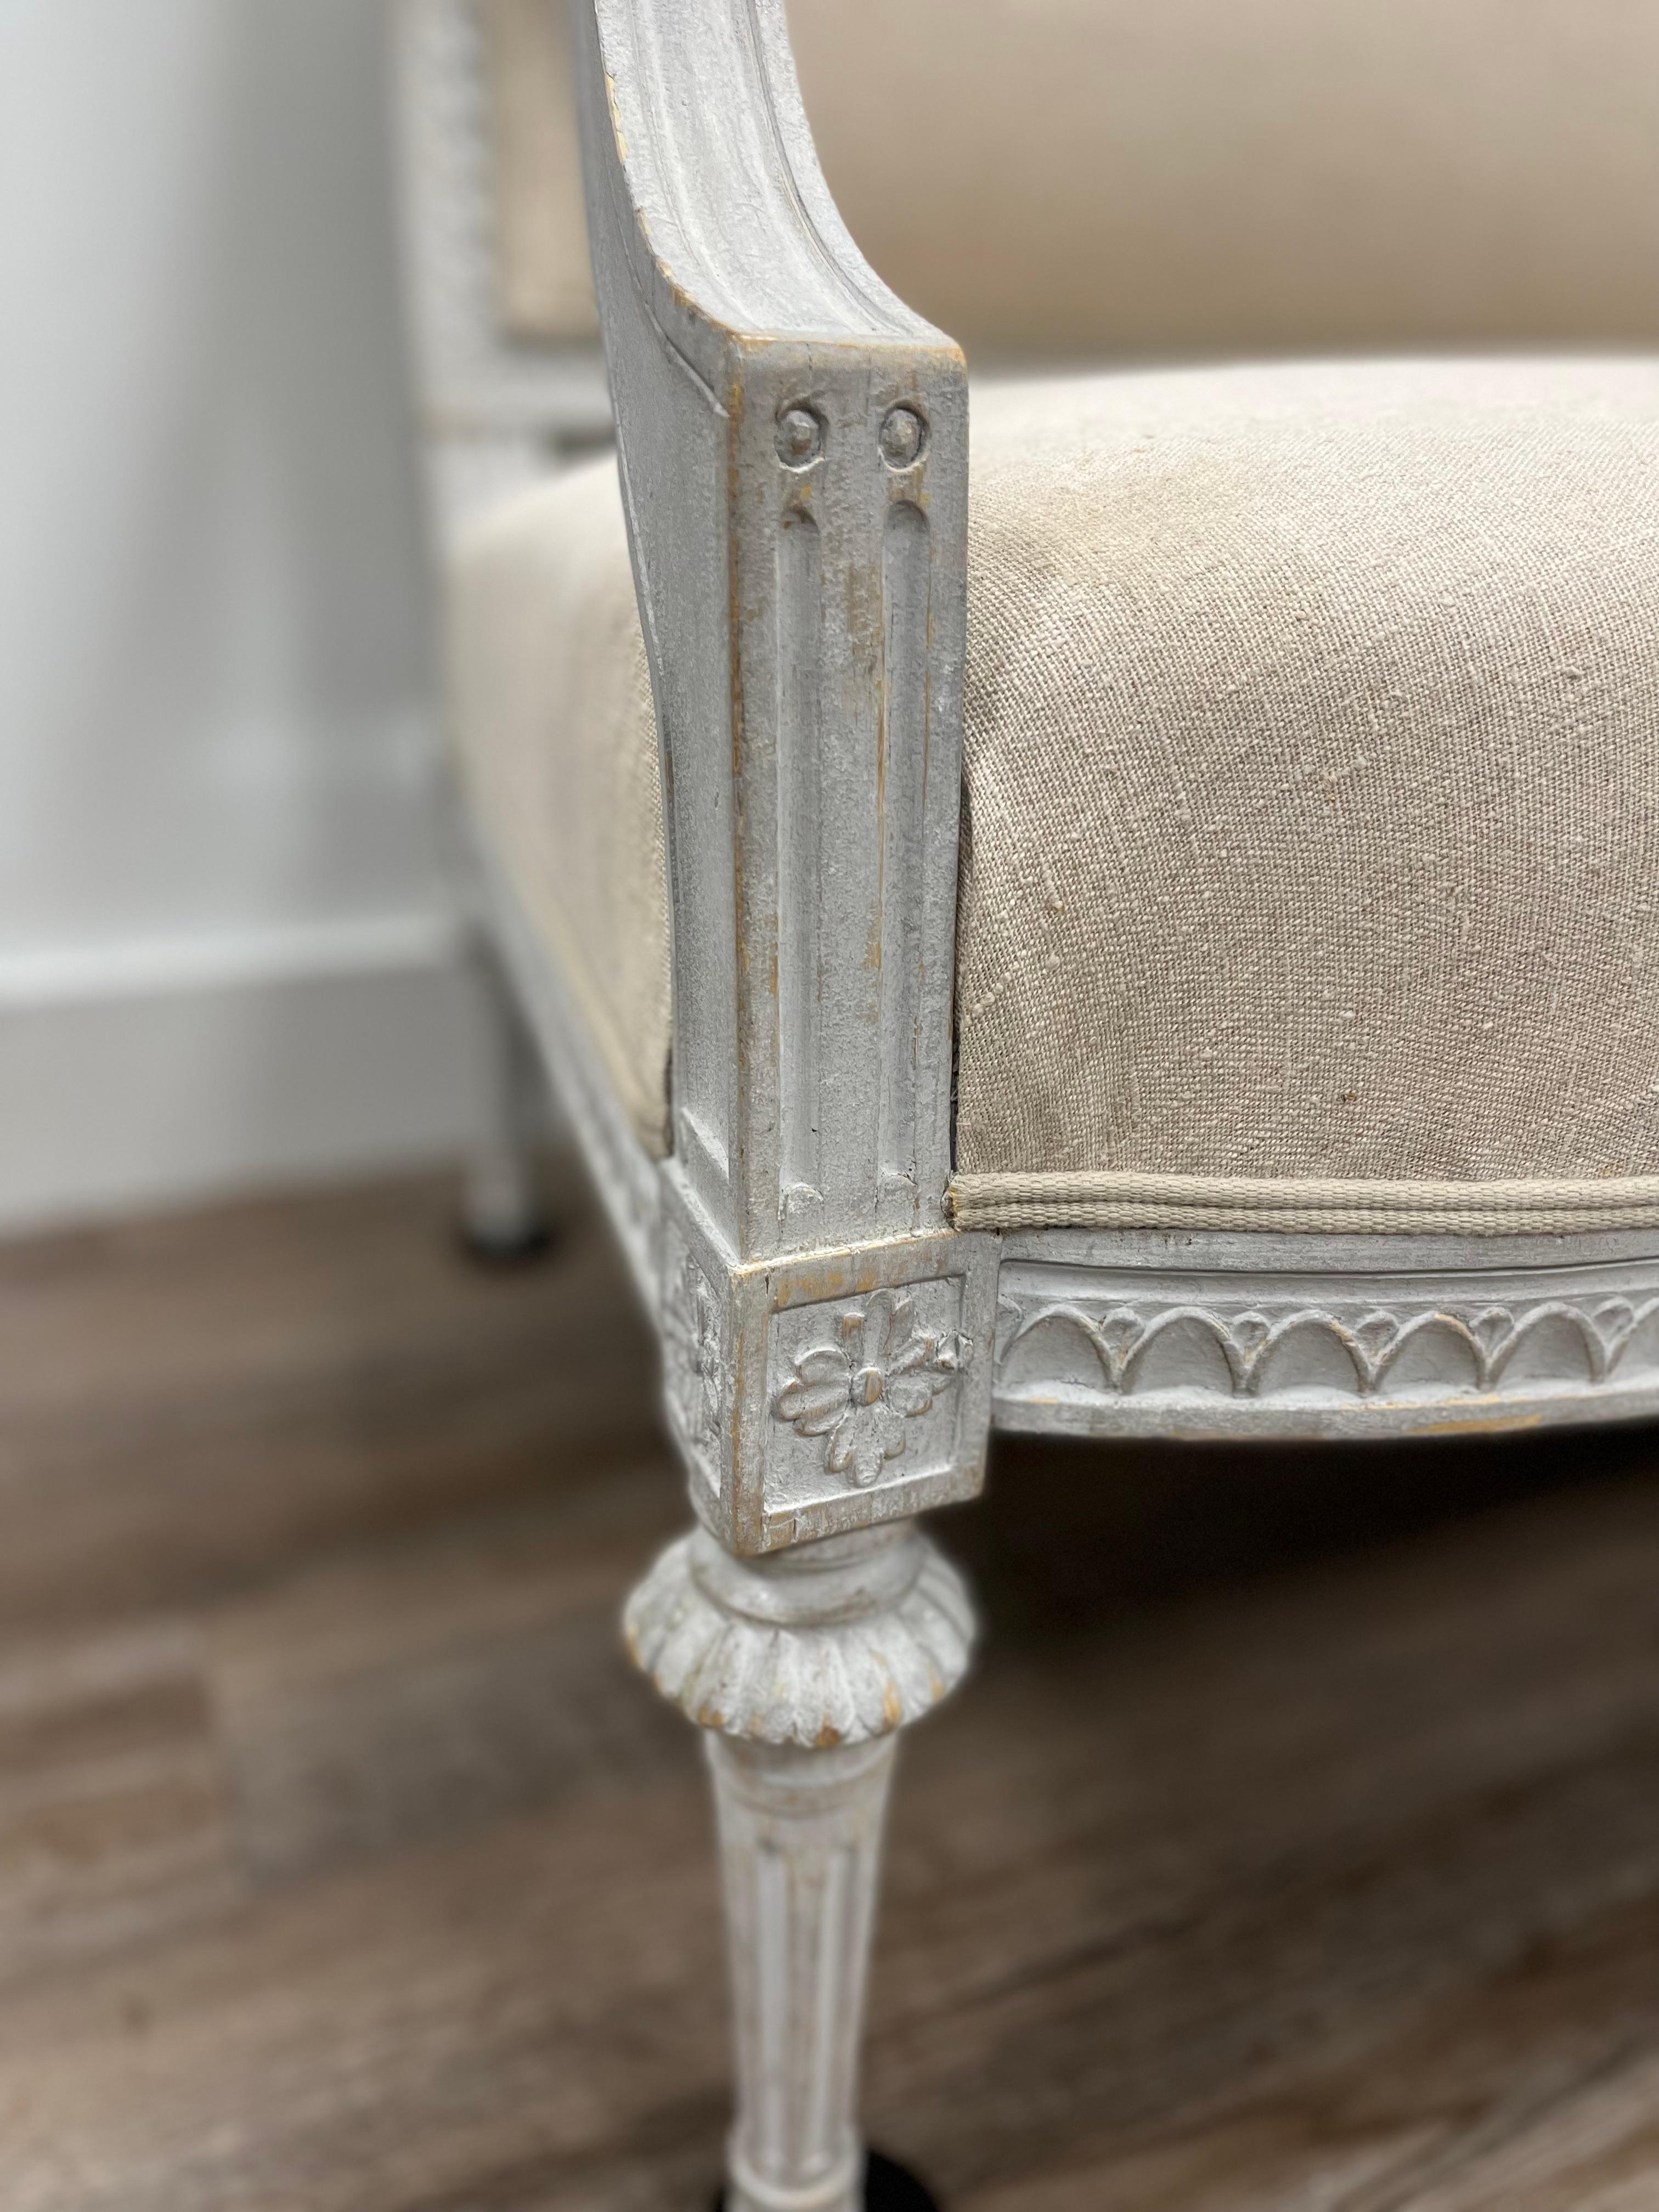 A sizable Swedish Late Gustavian sofa made in Stockholm by master furniture maker Ephraim Stahl (active 1794-1820). Signed ES on a back leg. Frames and sashes are decorated with upright leaves, also known as leaf cut. The front and side edges meet